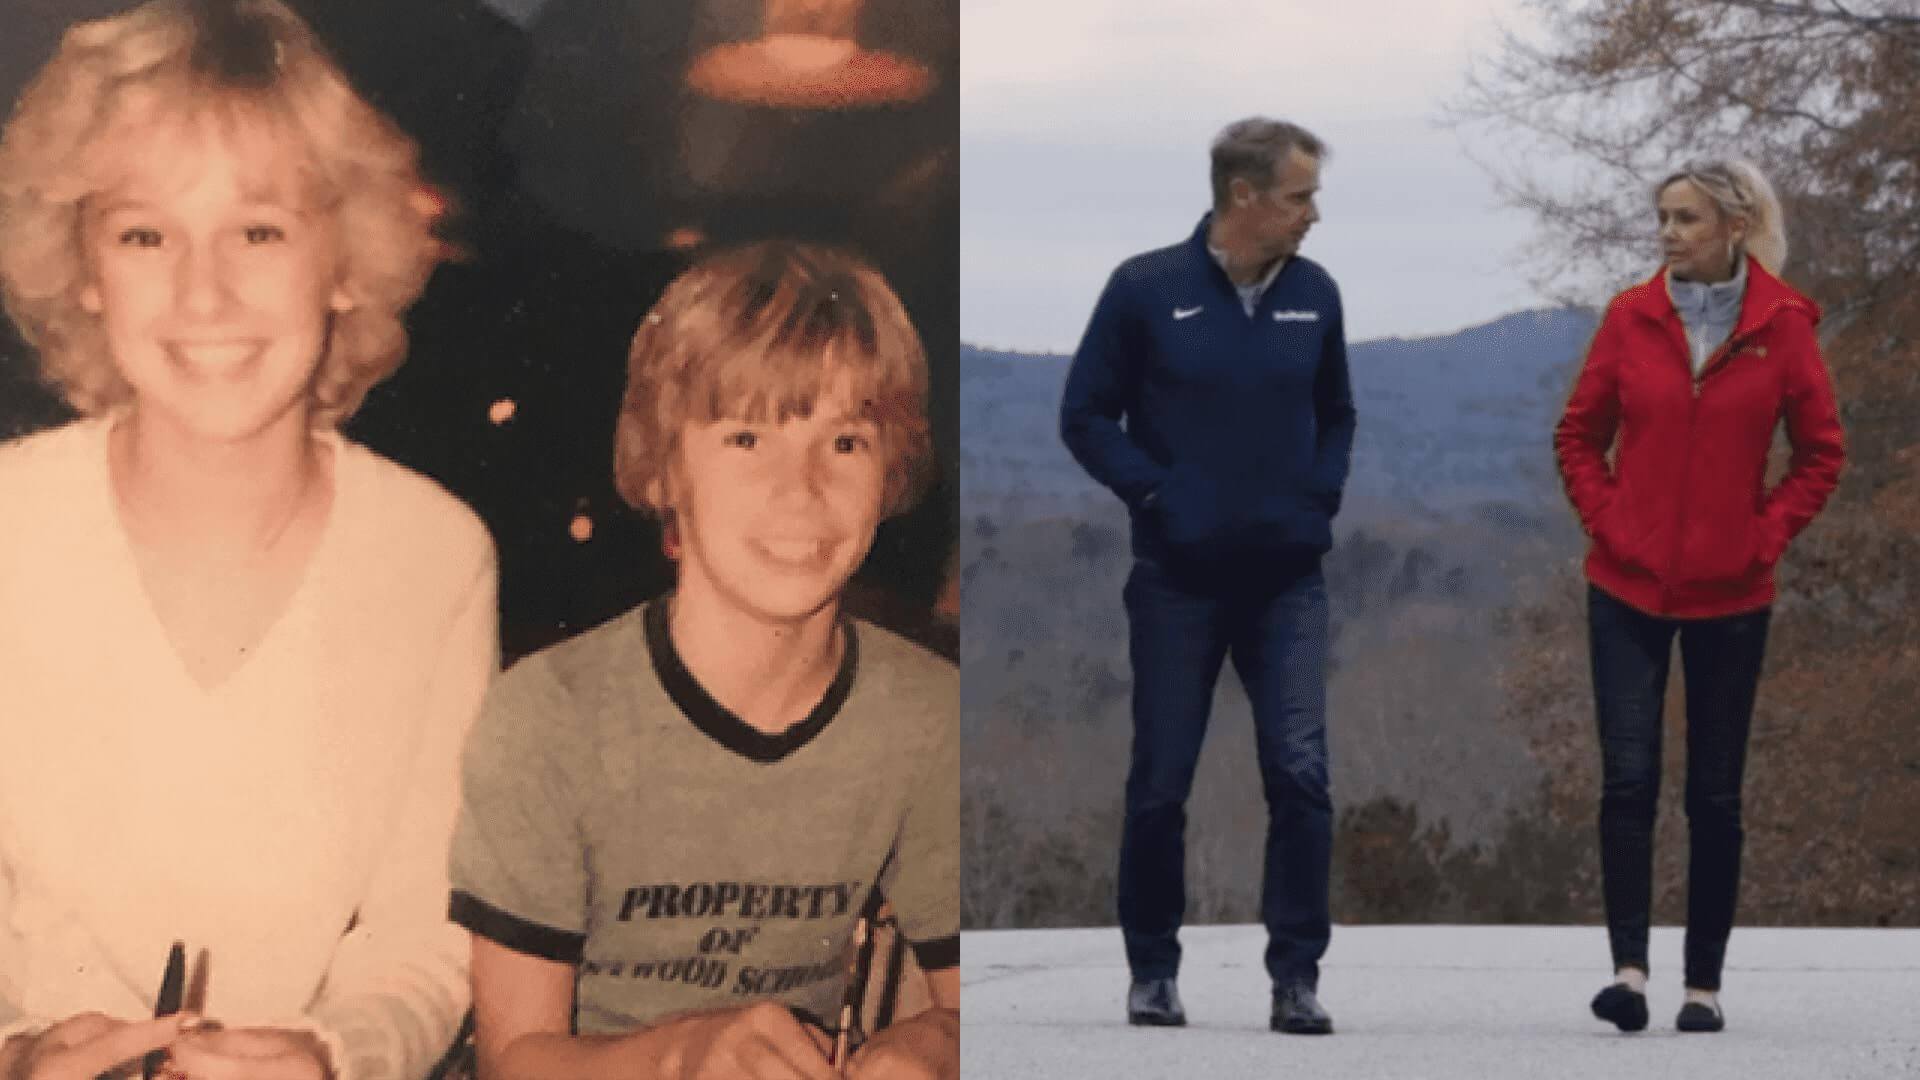 Dr. Jeff Hendricks and his sister in childhood and as adults